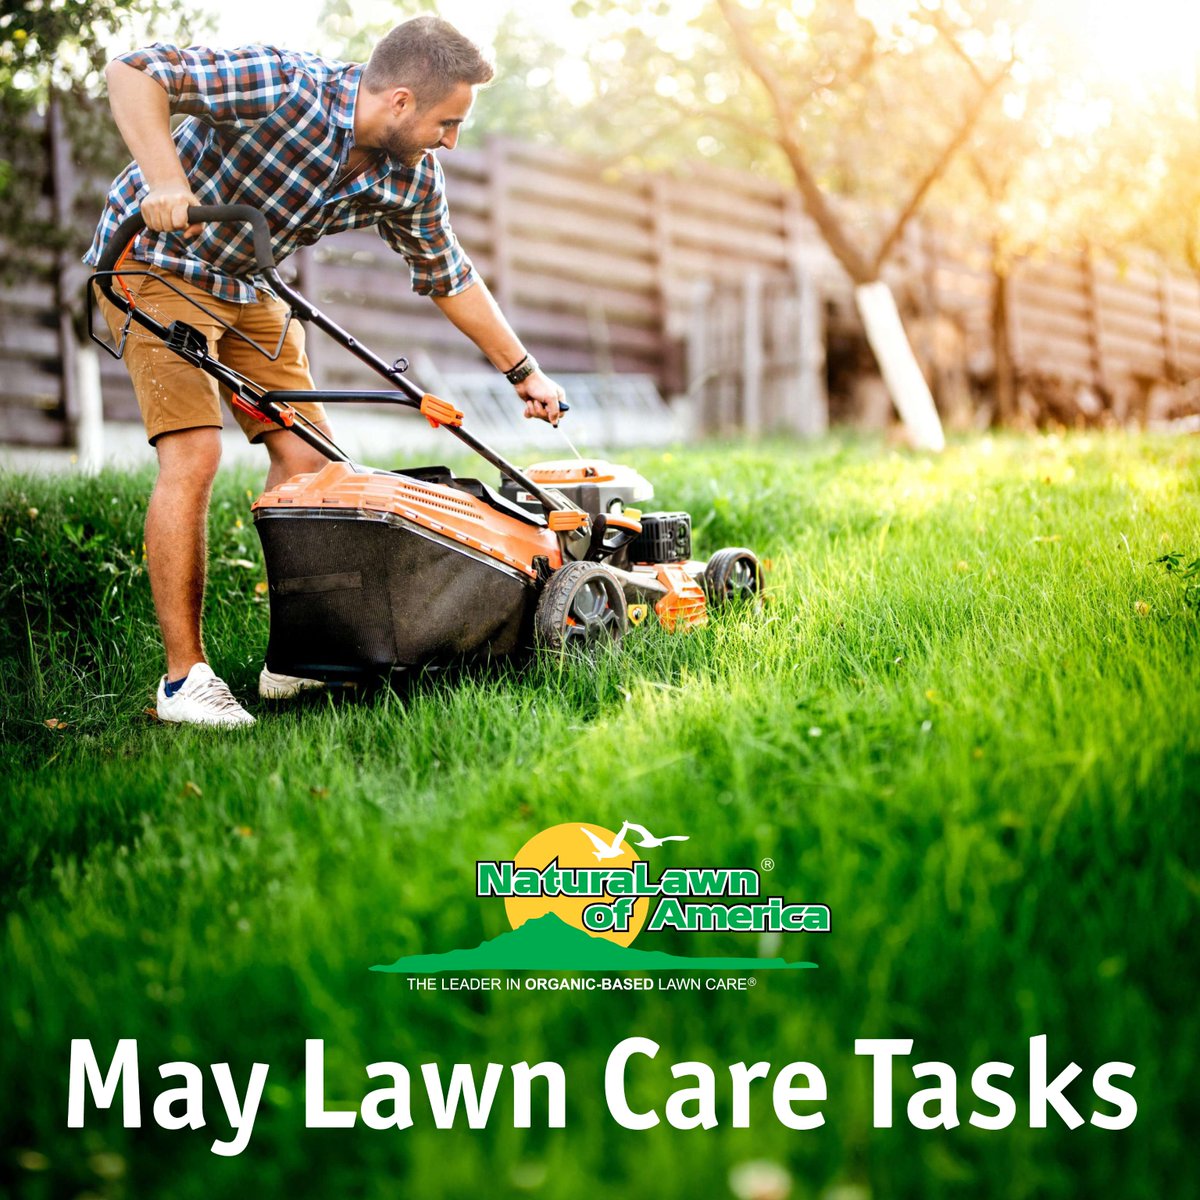 Read advice from Phil Catron, president and founder of NaturaLawn®, as we tackle these 9 lawn care tasks this May to have a greener and healthier lawn this summer and beyond. ow.ly/k67x50RsVCq #NaturaLawn #EnvironmentallyFriendly #NLA #PetFriendly #NaturalLawnCare